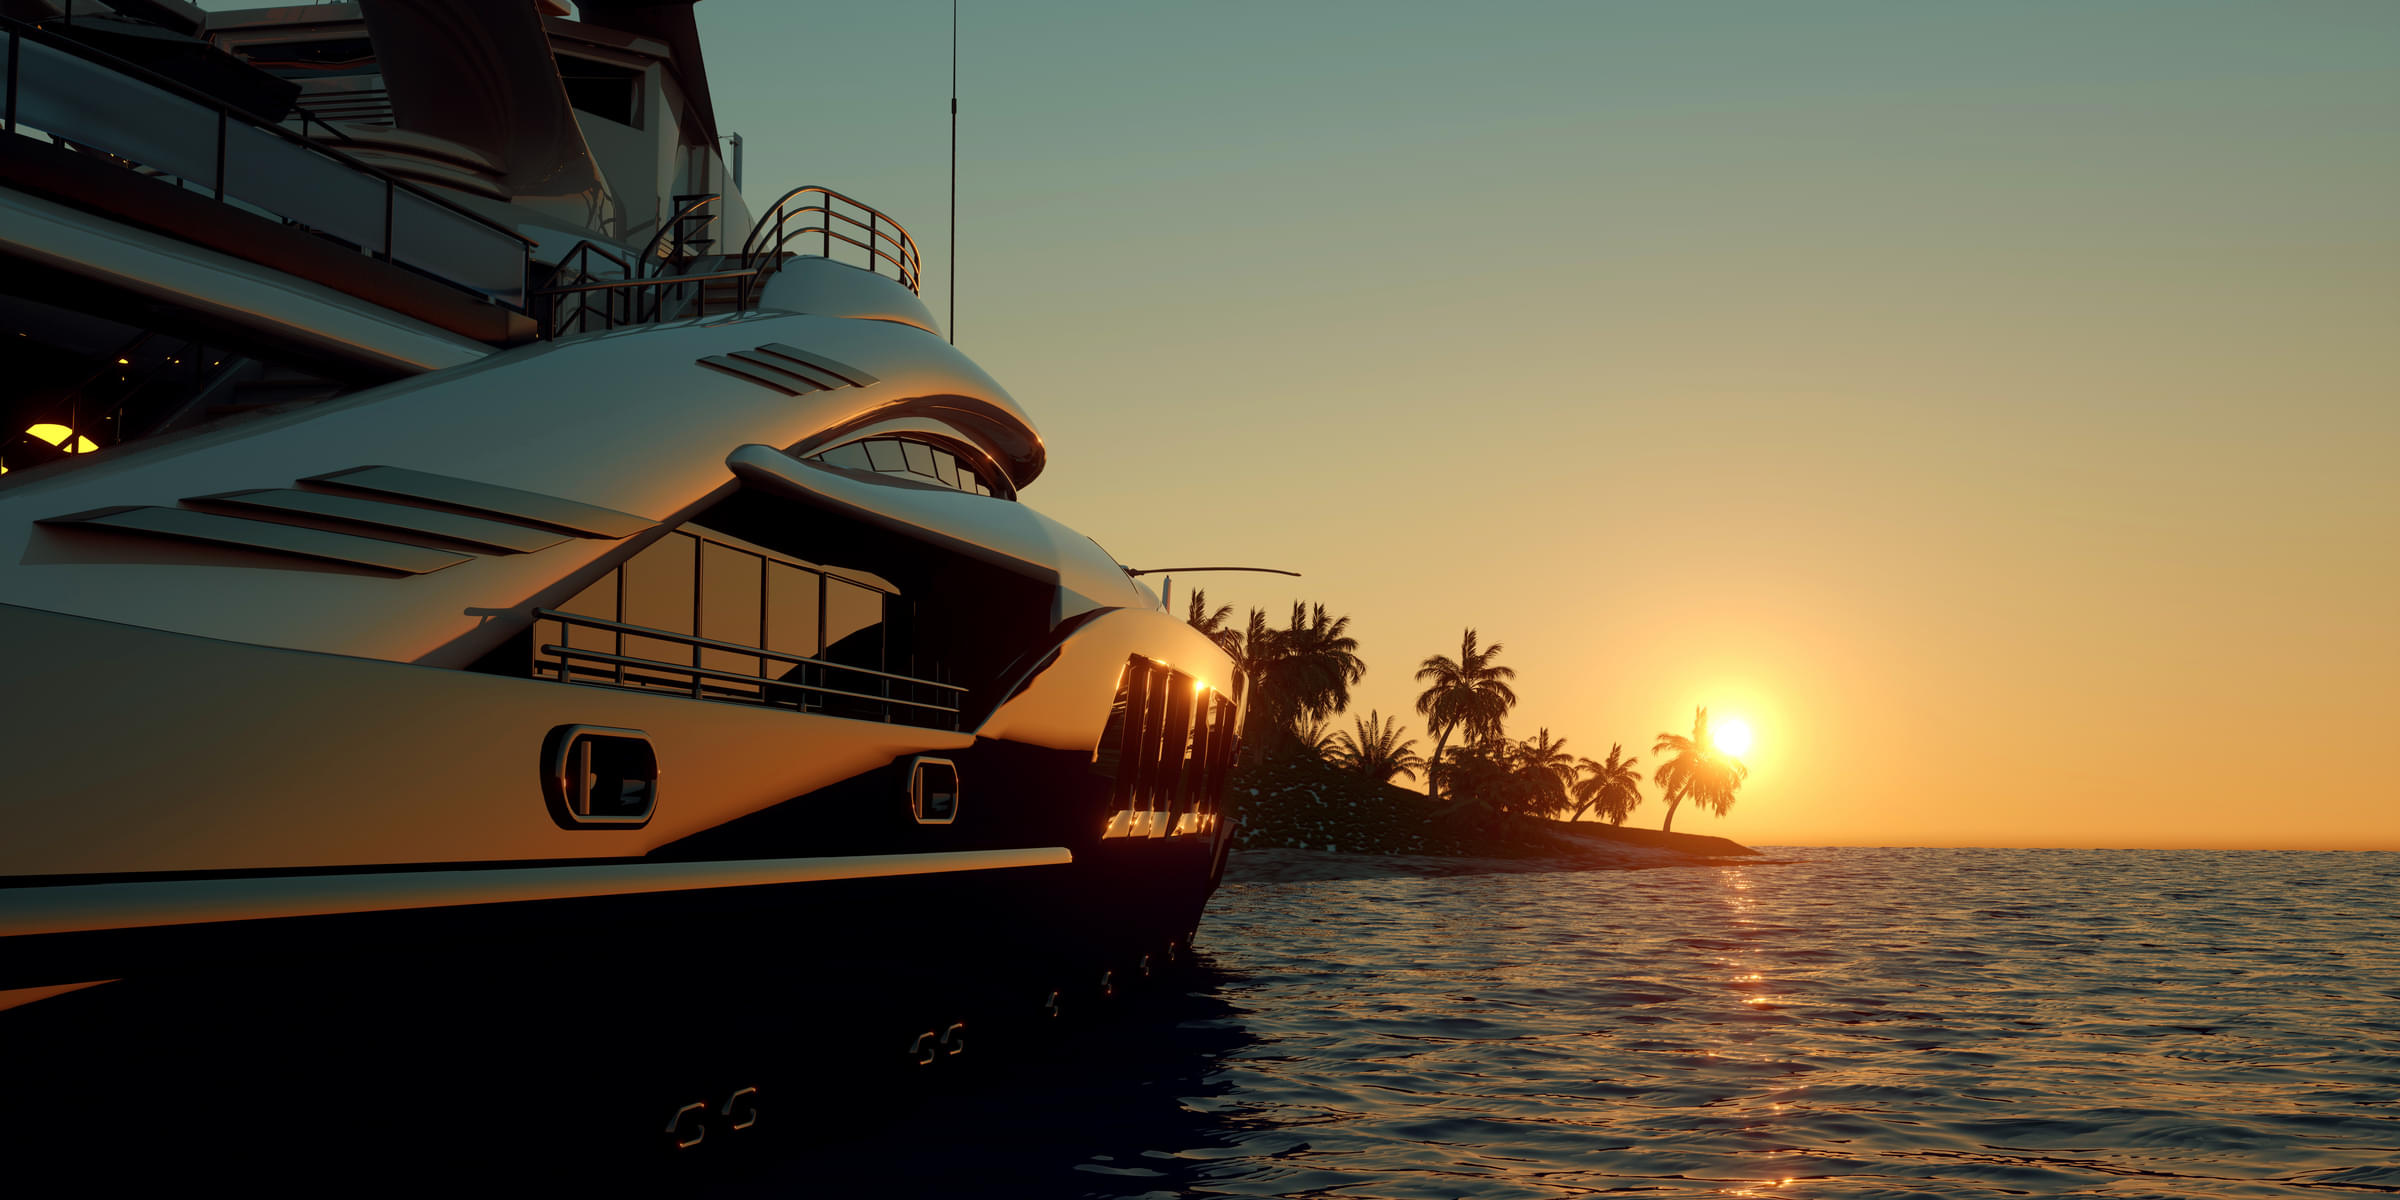 Relax on you way back on a luxury yacht